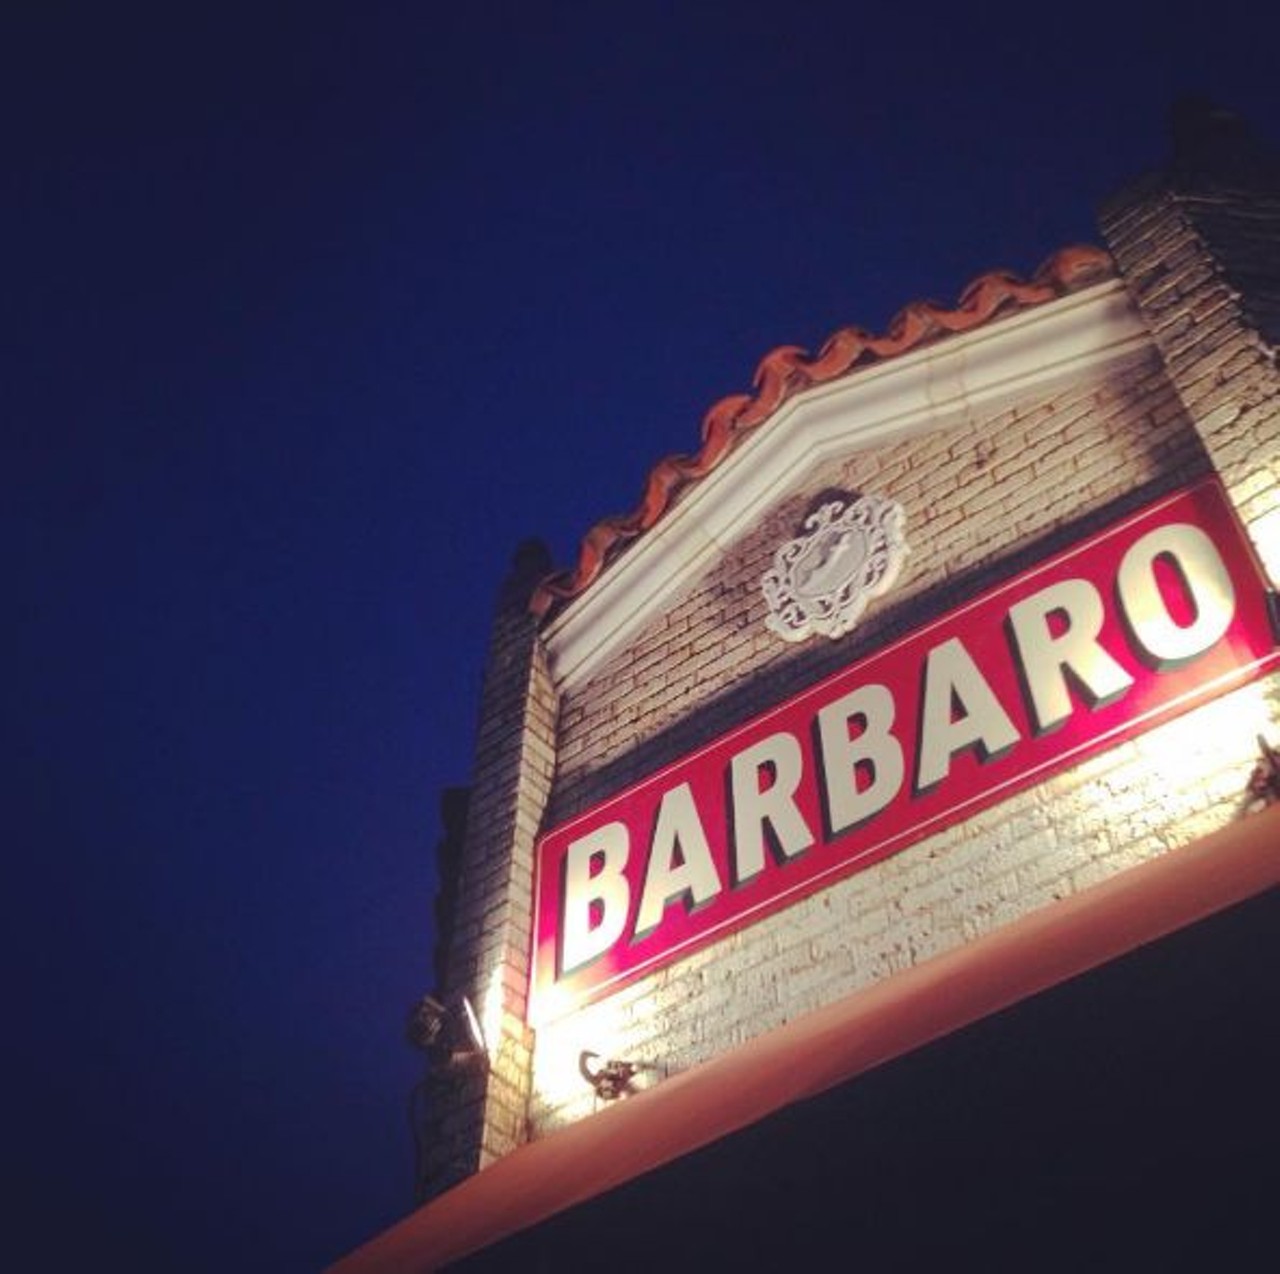 Barbaro
2720 McCullough Ave., (210) 320-2261, barbarosanantonio.com
Swing by Barbaro before the kitchen closes at 12:30 a.m. on Fridays and Saturdays during your next night of bar hopping.
Photo via Instagram, sun_carlos